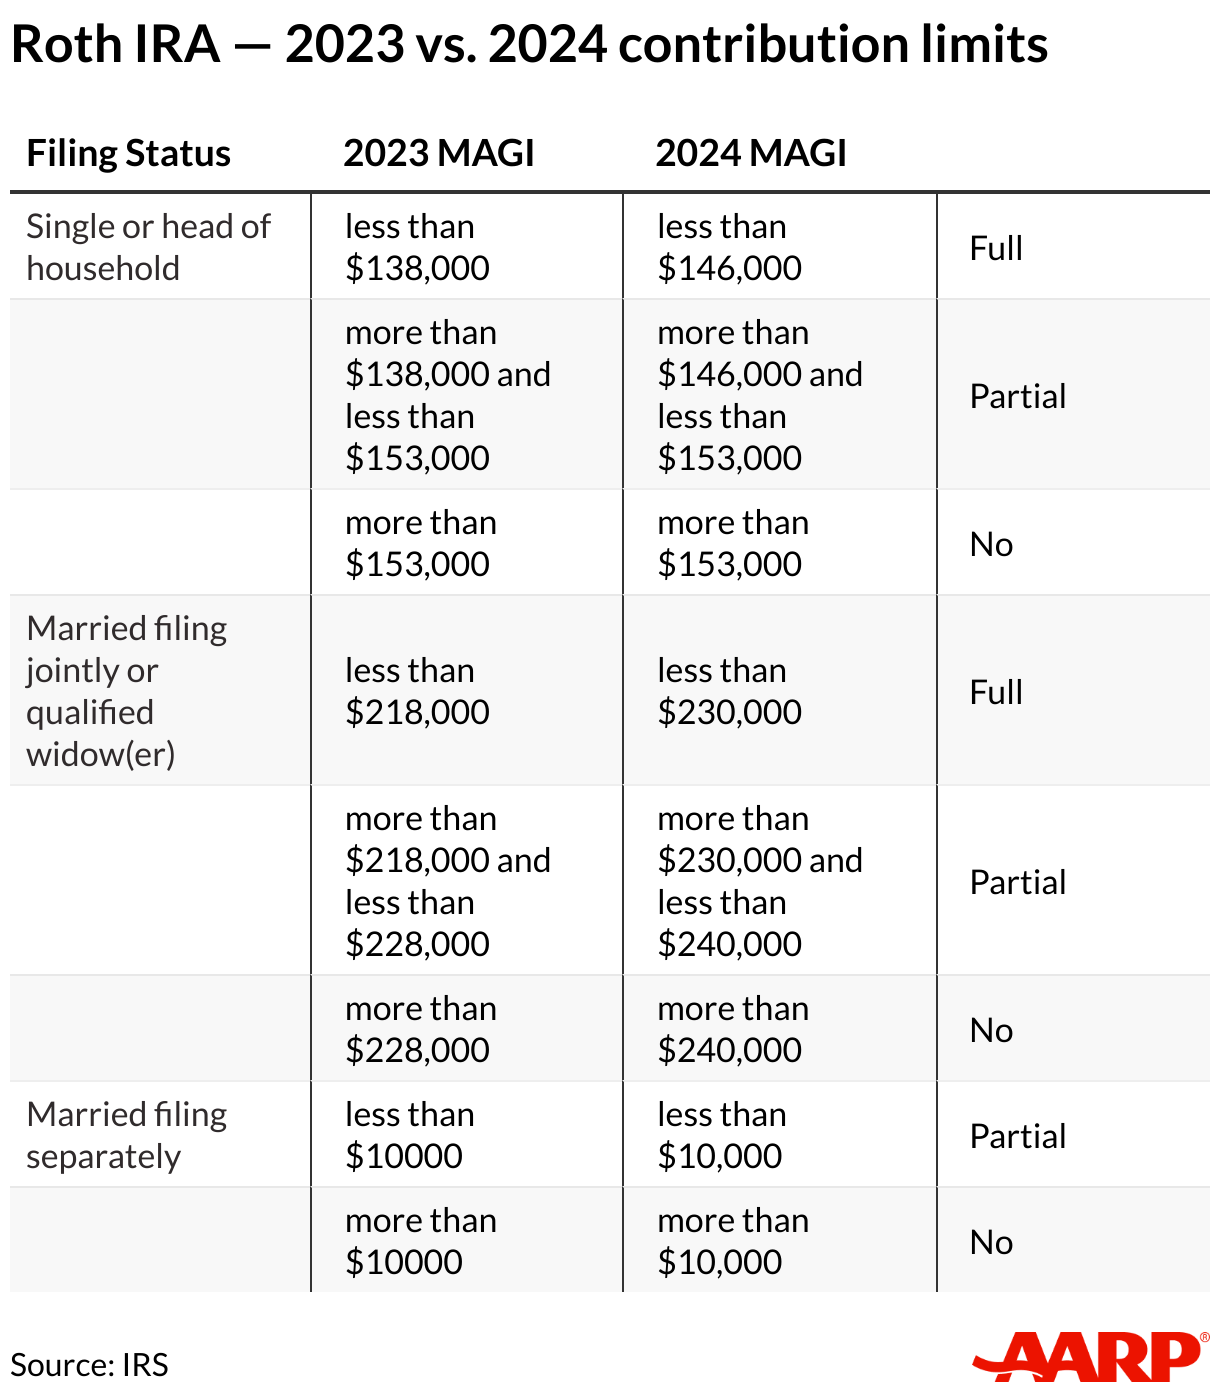 Comparison chart of Roth IRA contribution limits for 2023 vs. 2024